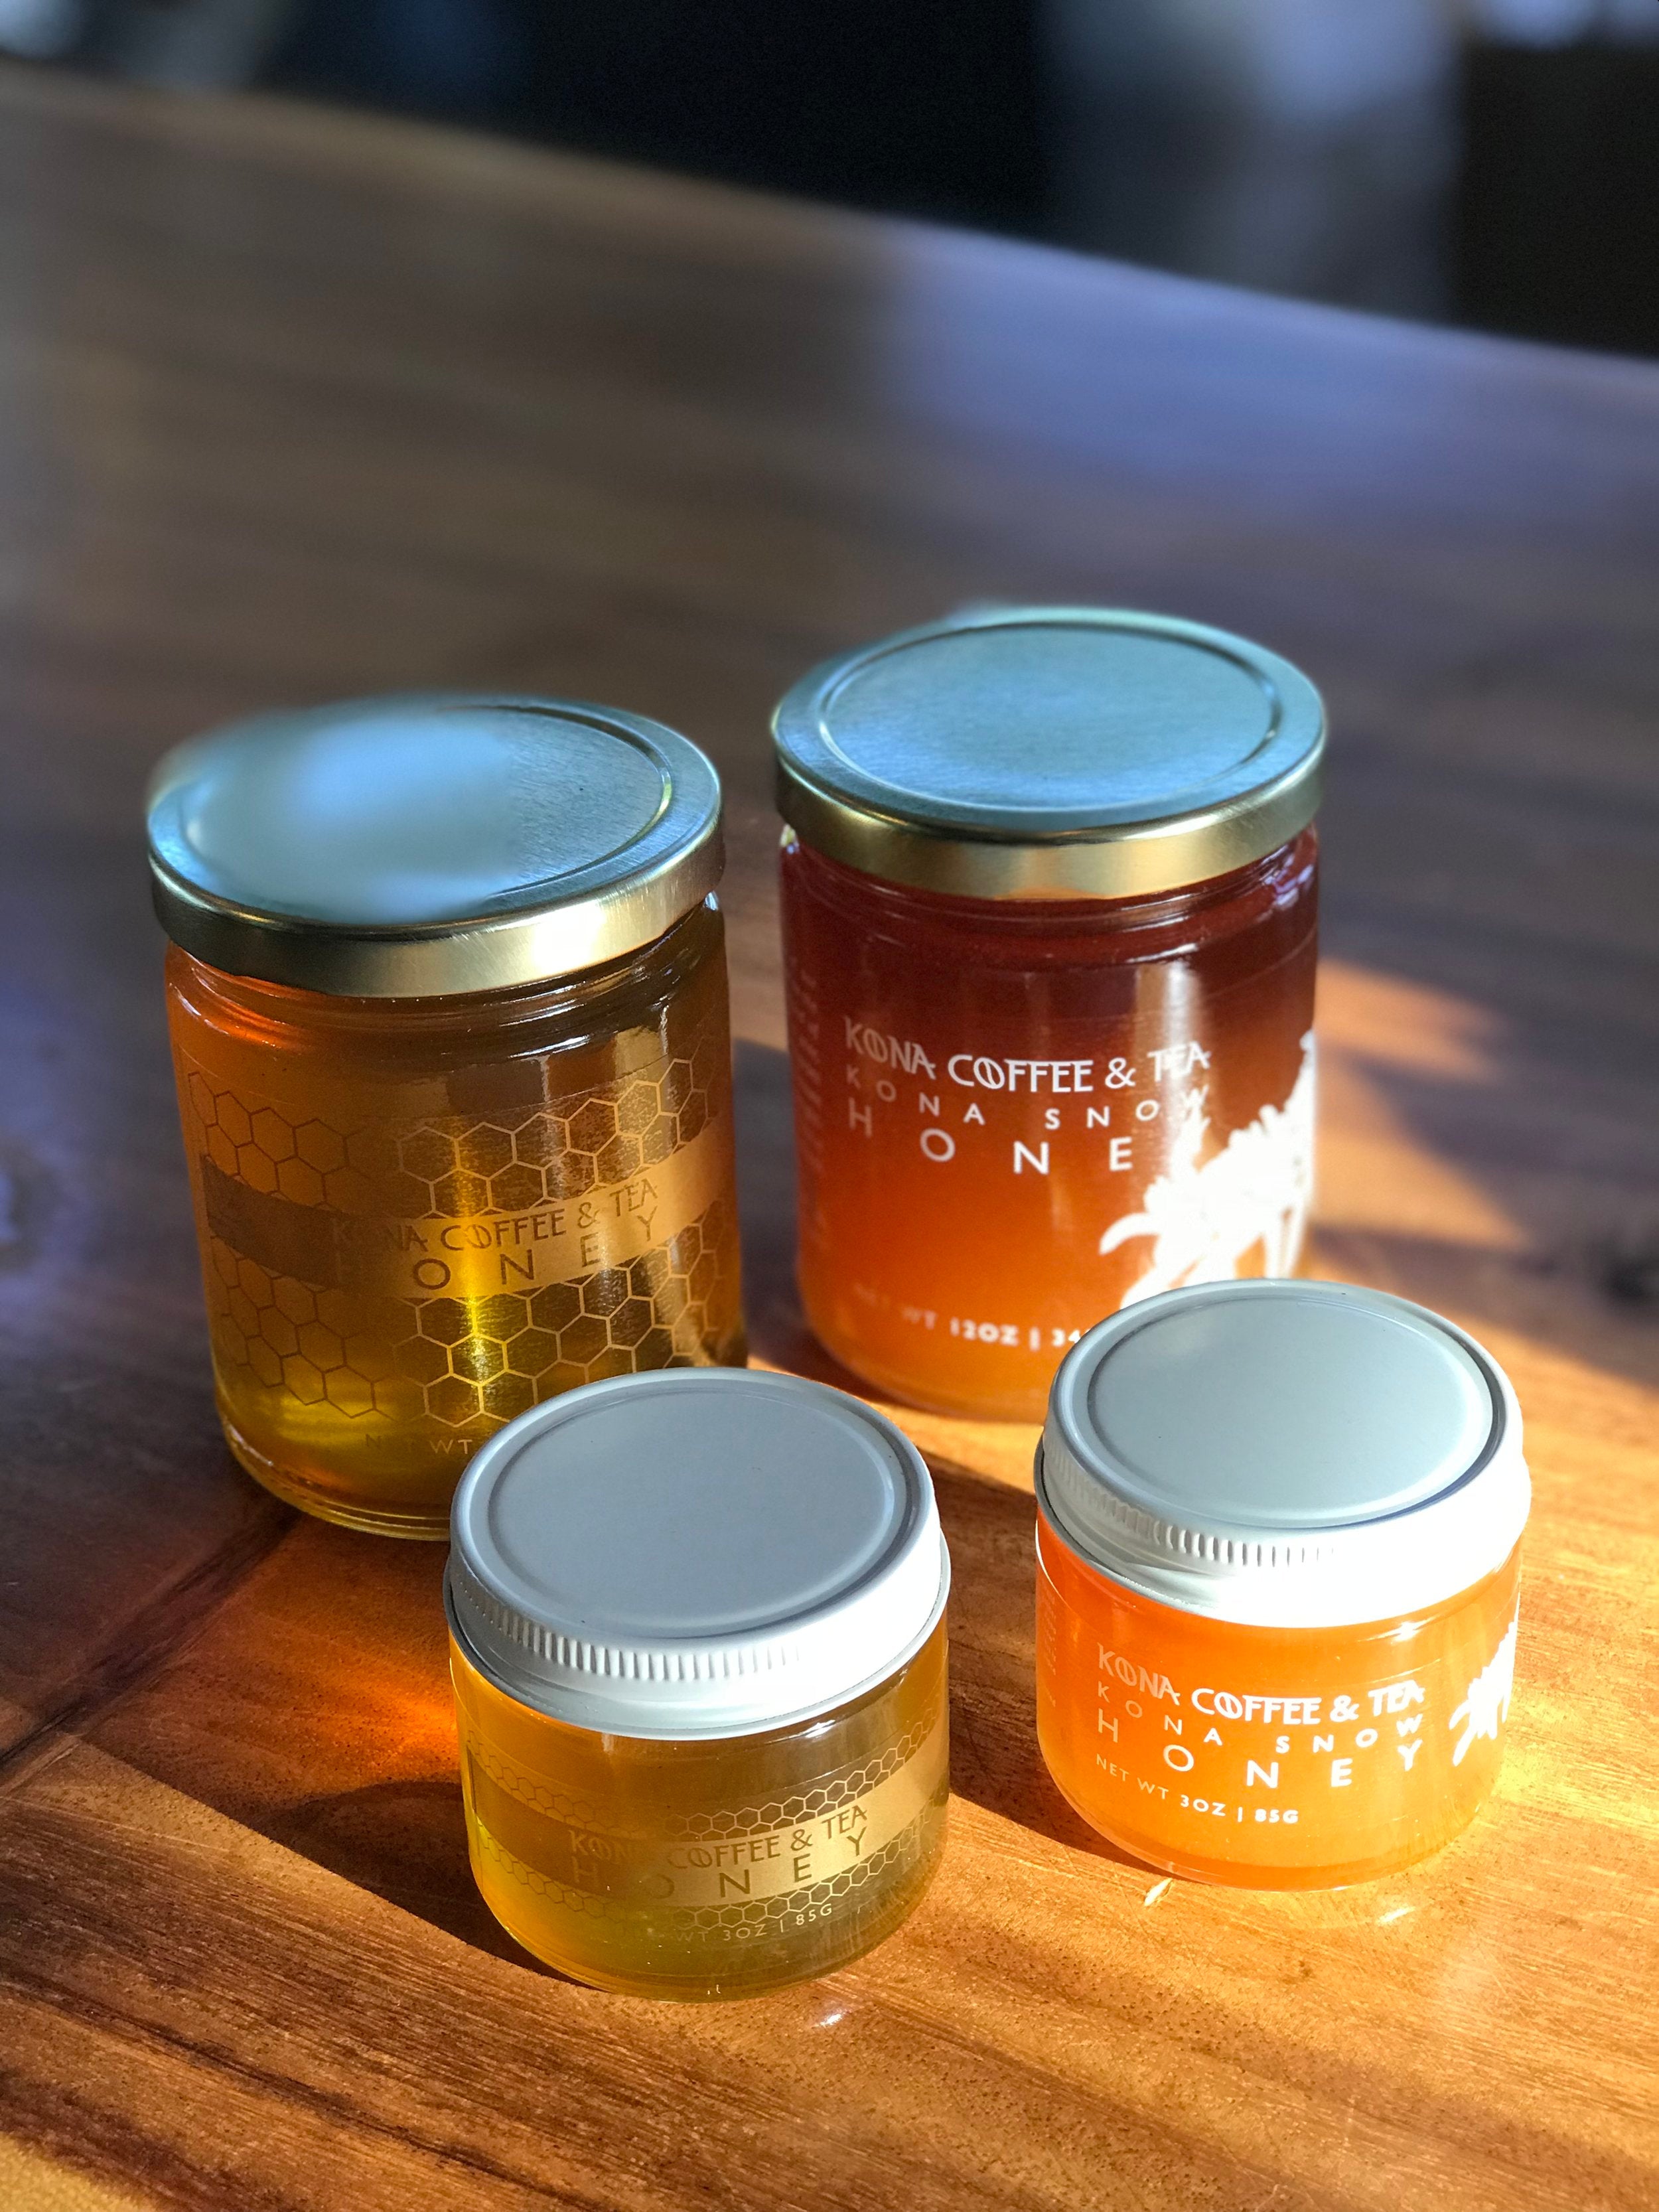 We offer two kinds of honey: a Mixed Blossom and Kona Snow (only harvested when the Kona coffee flowers are in bloom for a few months a year).&nbsp;PHOTO: Chance Punahele&nbsp;